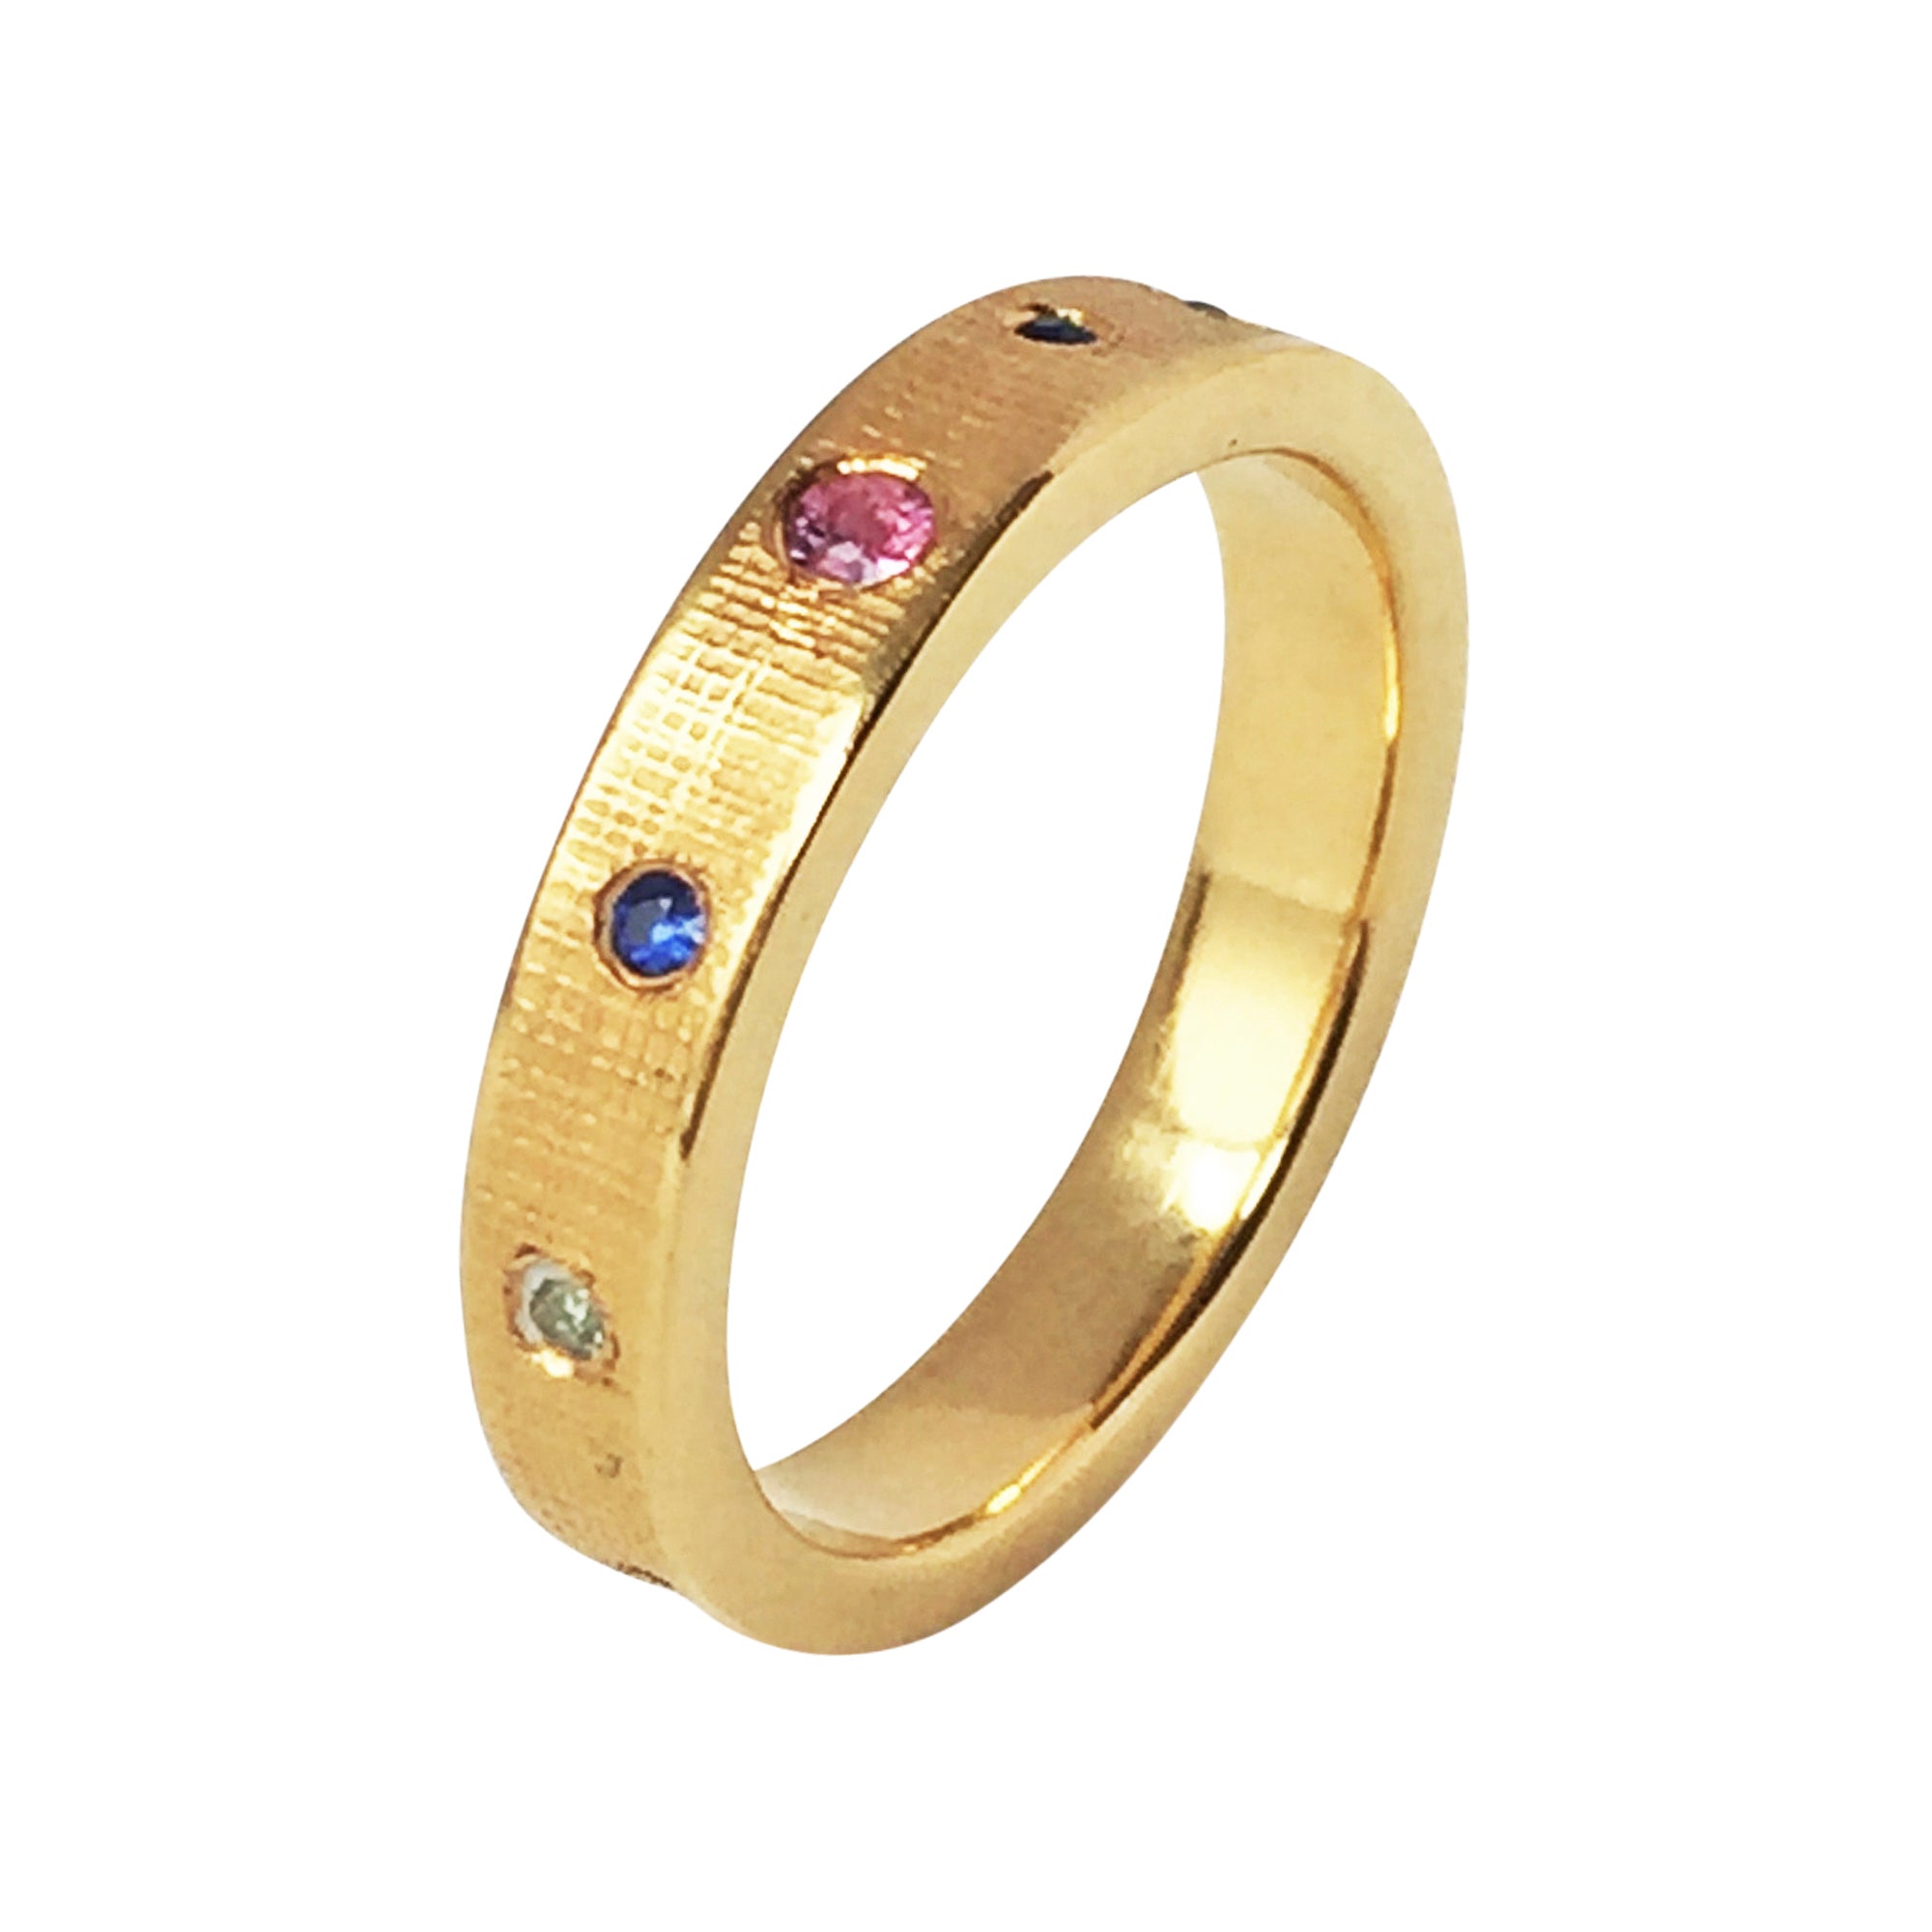 Wedding Eternity Ring With Mixed Sapphires - Vicky Davies Jewels